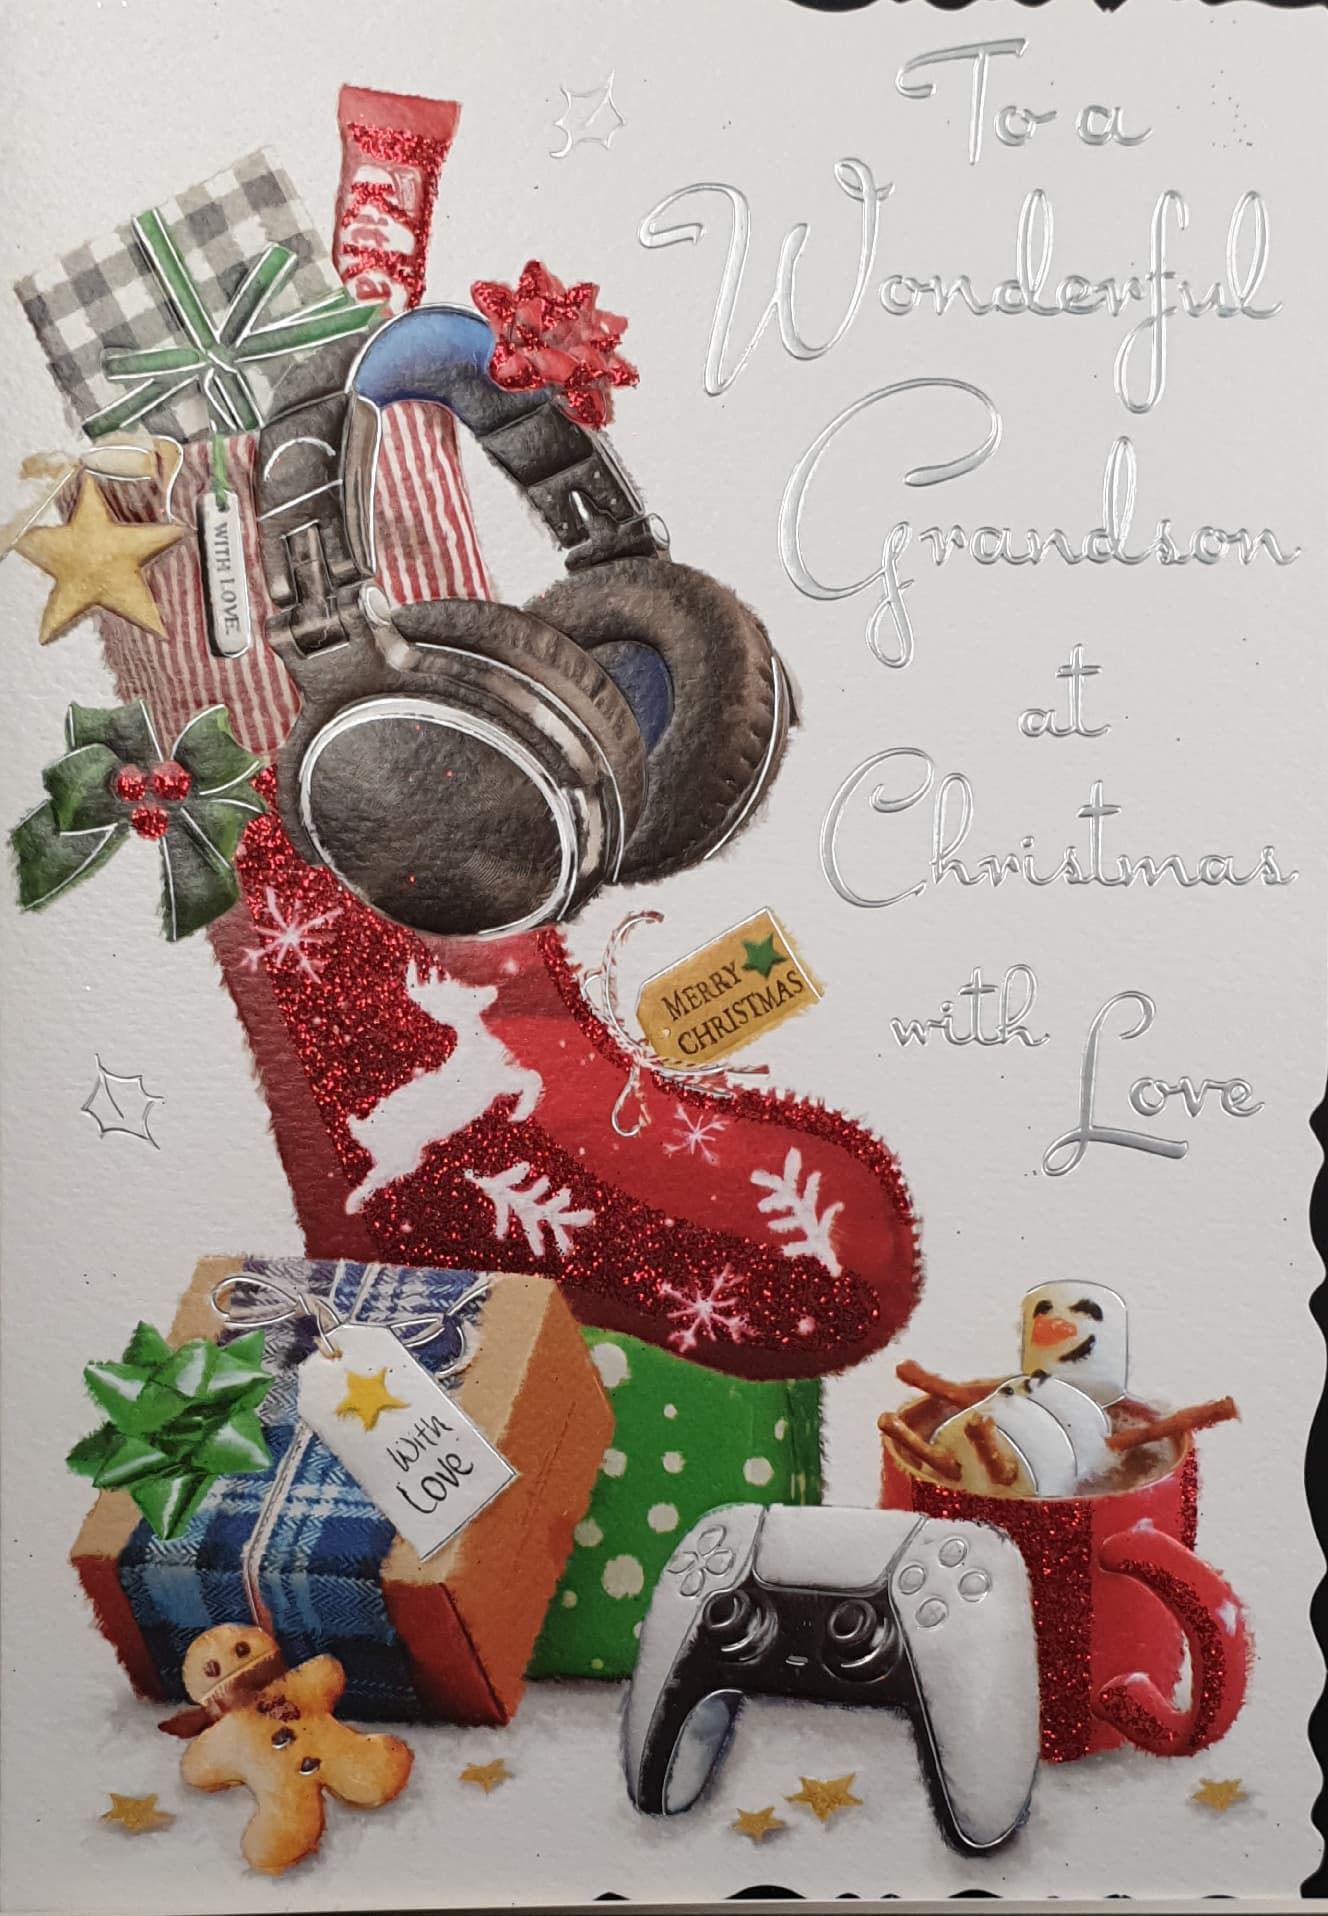 Grandson Christmas Card - Headphones, Controller & Hot Chocolate with Red Stocking